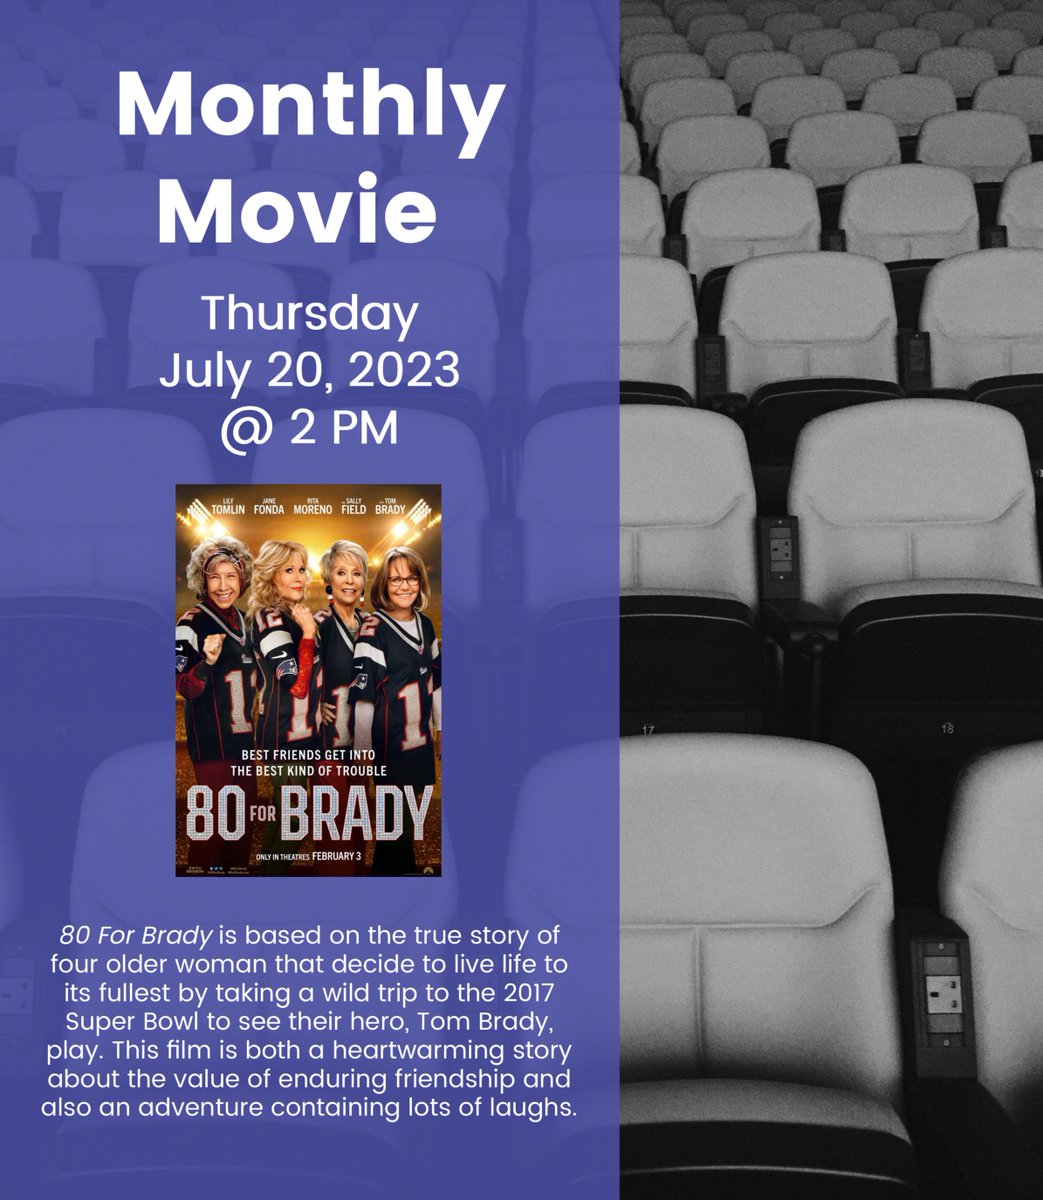 Join us this afternoon at 2 PM for July's monthly movie, 80 for Brady, starring Lily Tomlin, Jane Fonda, Rita Moreno, and Sally Field! https://t.co/ubJAIUp8H4